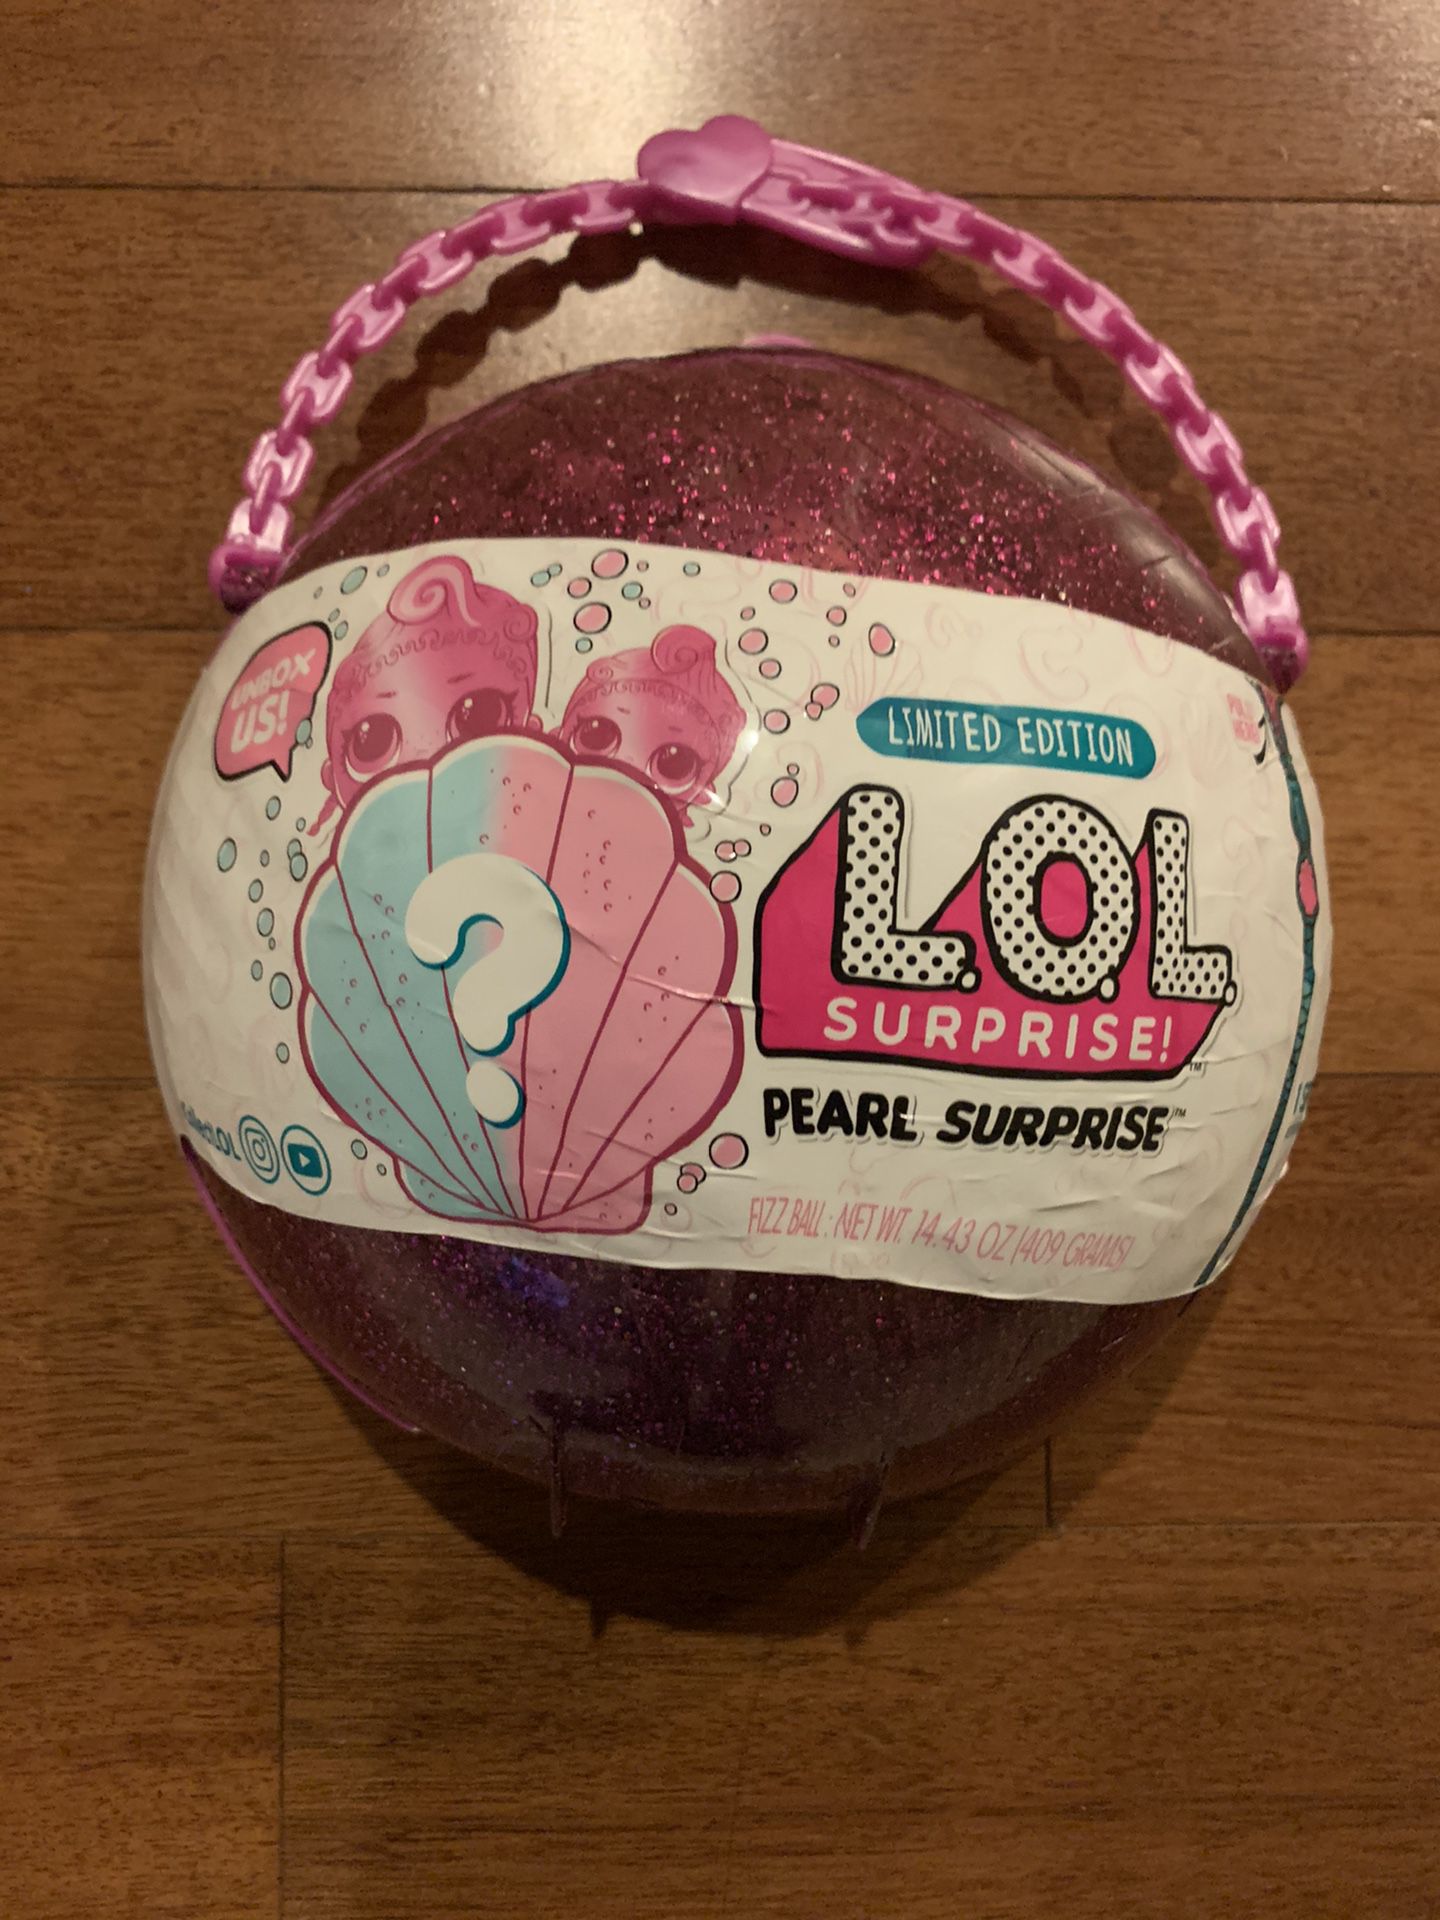 LOL pearl surprise limited edition